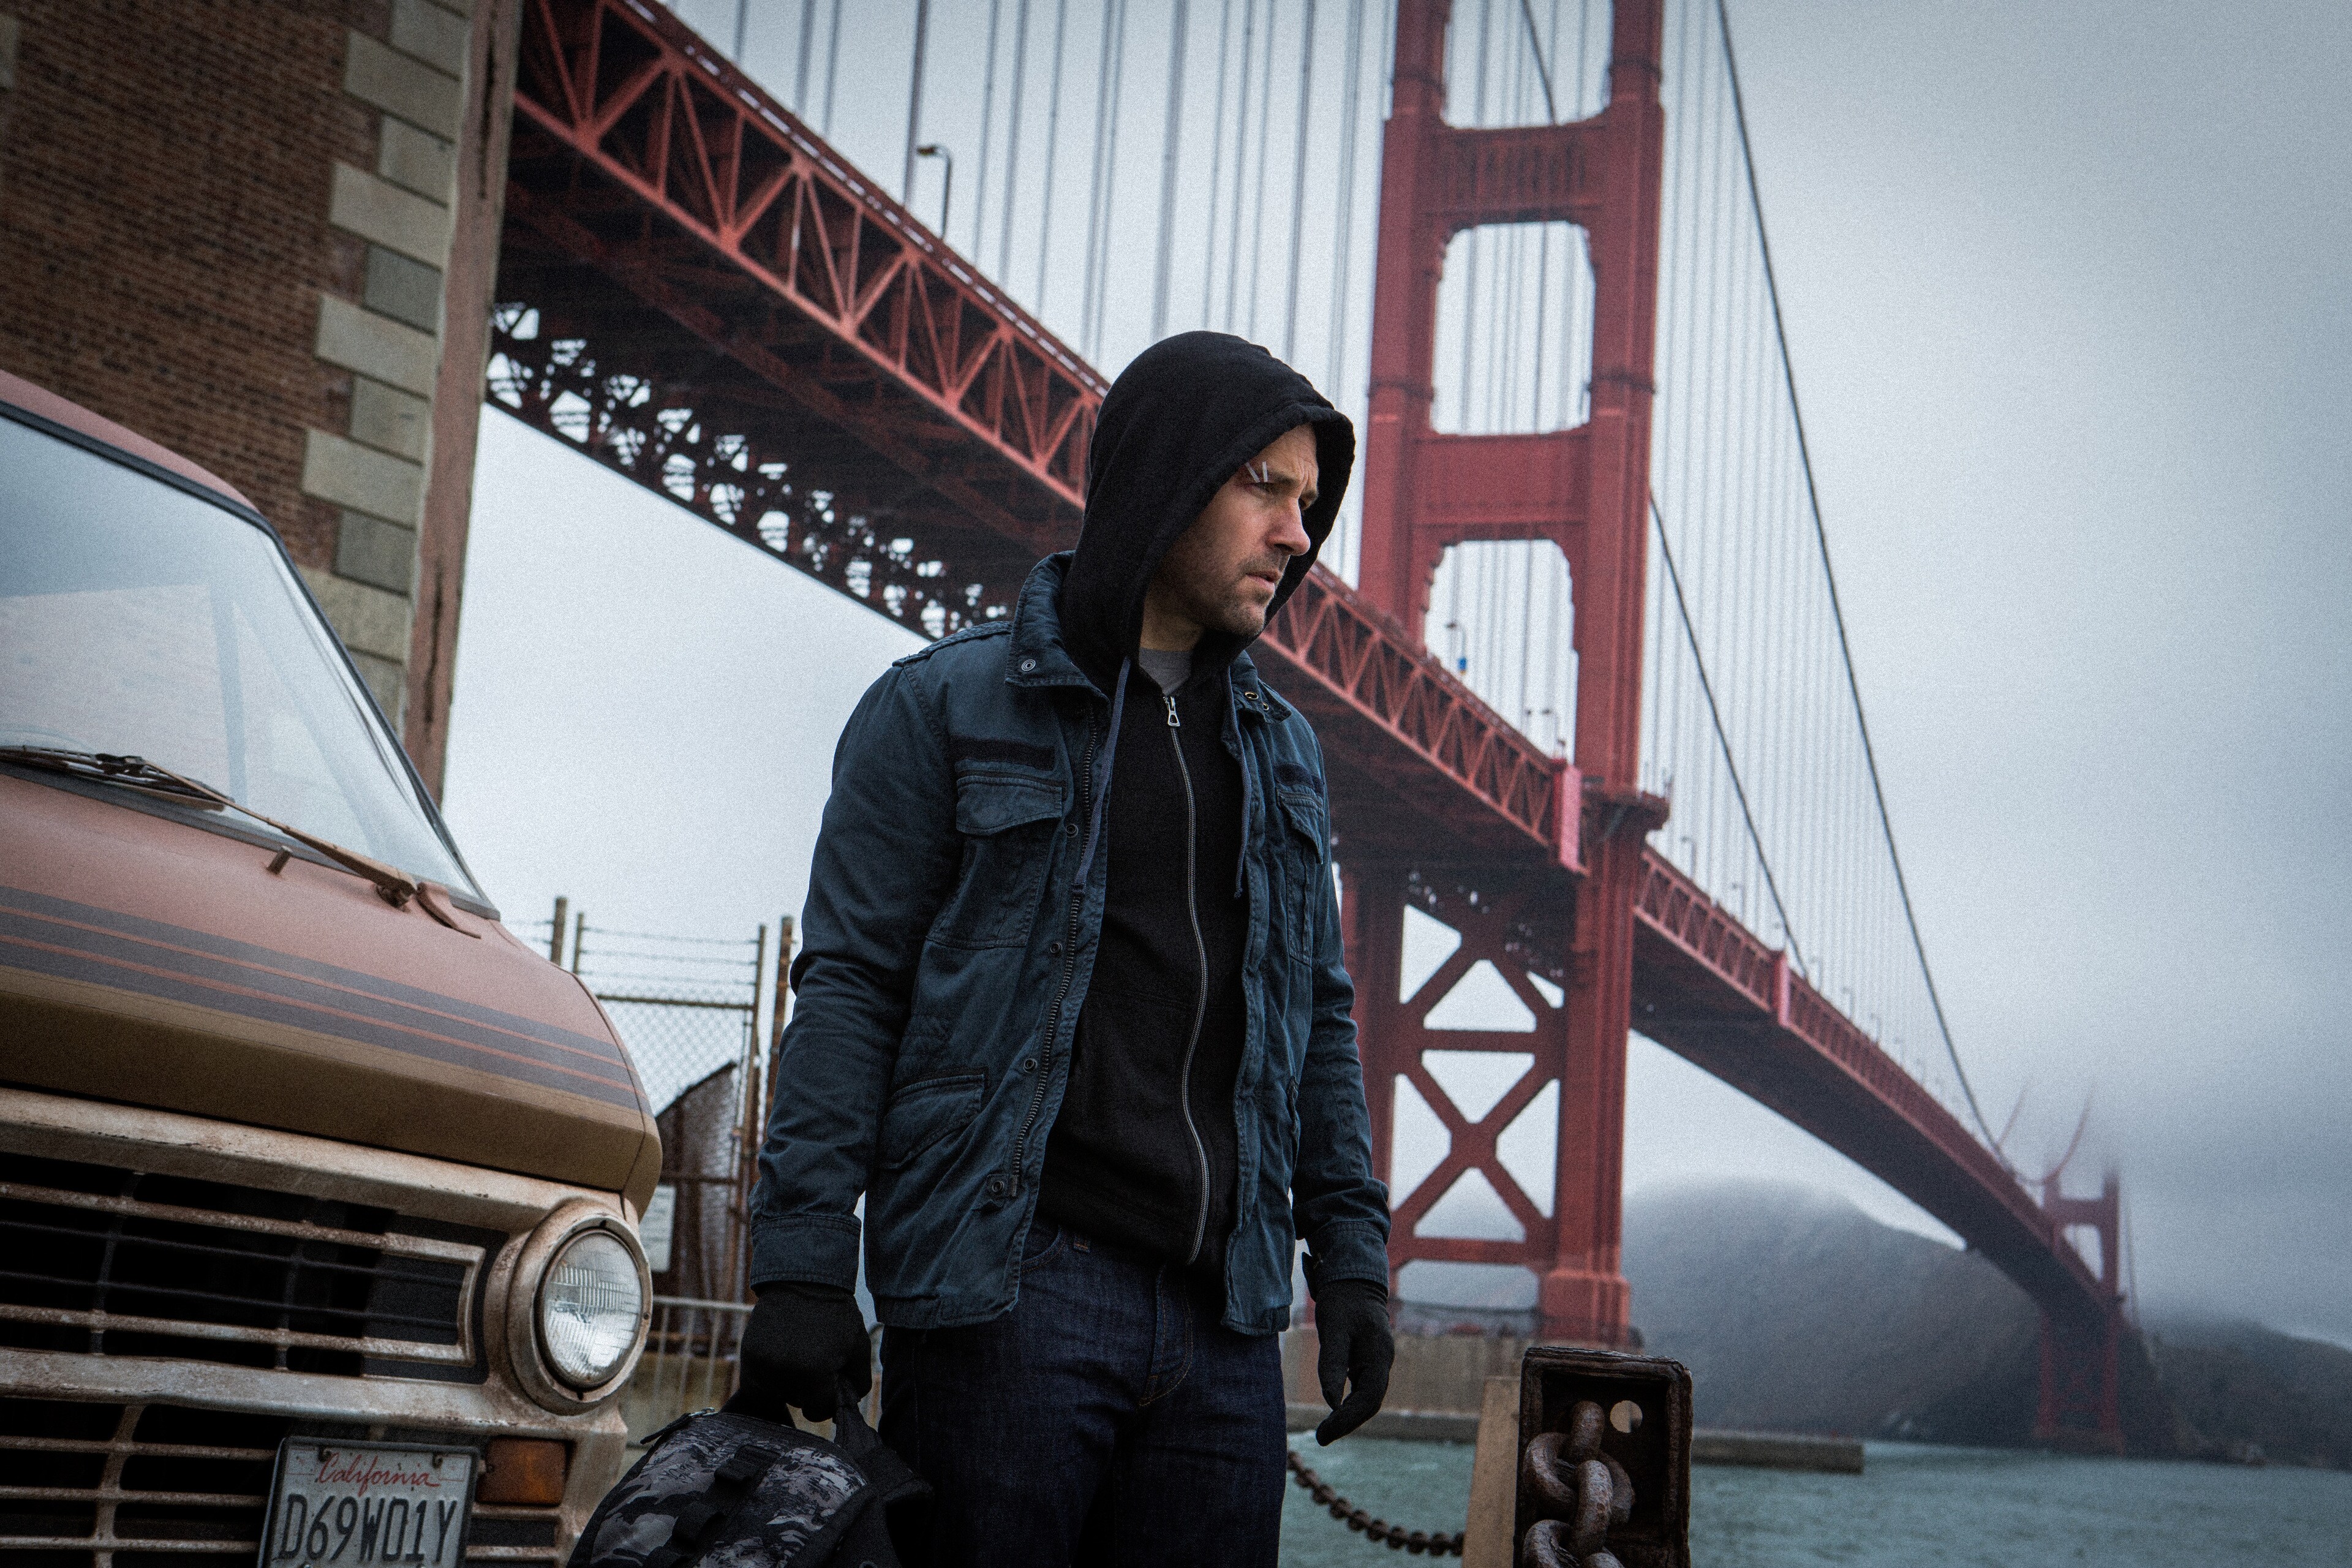 Paul Rudd as Scott Lang standing in front of the golden gate bridge in the movie "Ant-Man"